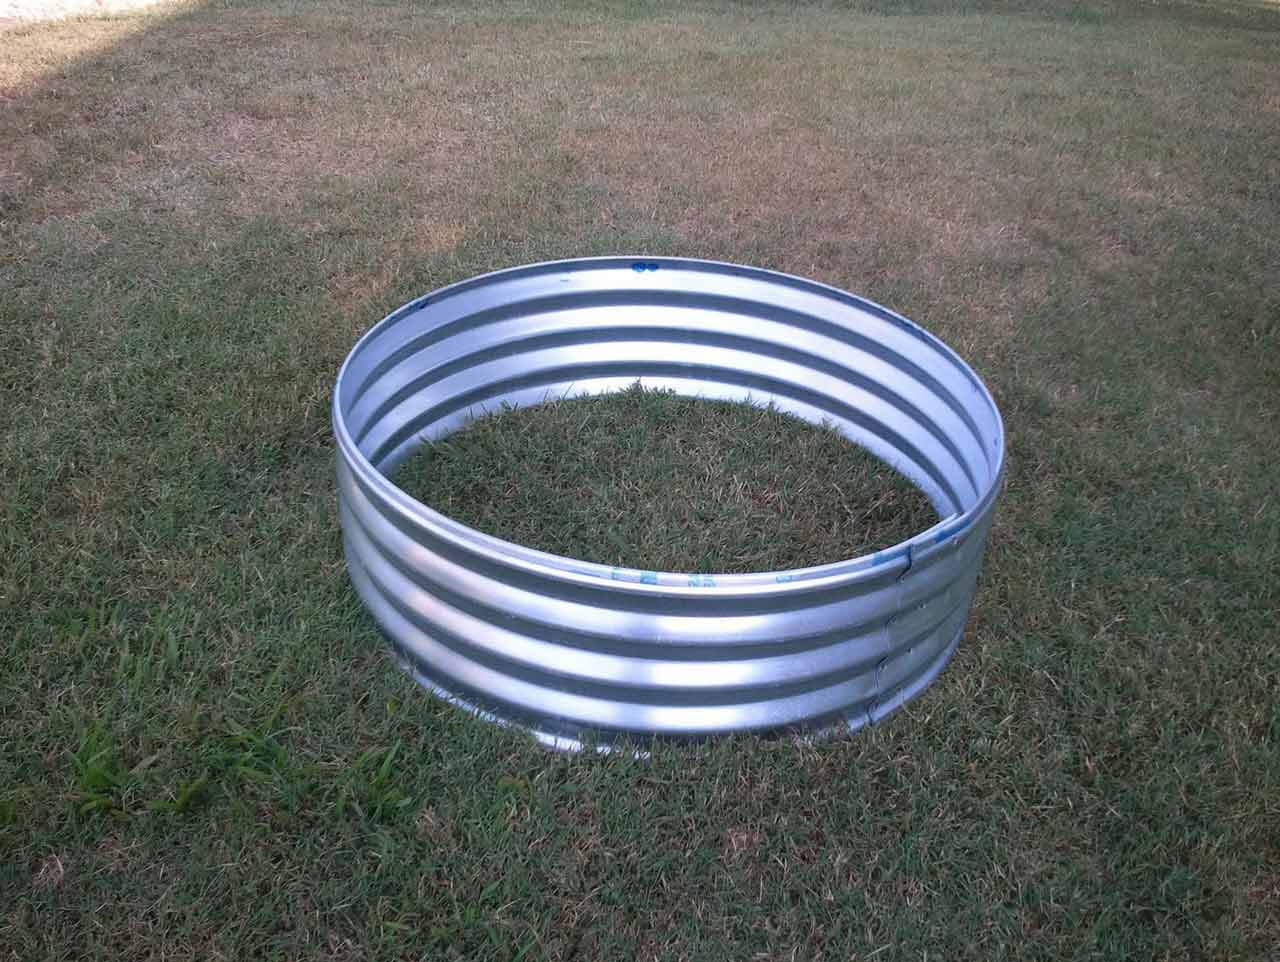 fire pit ring-complex-as-metal-ring-for-fire-pit-hollowing-out-how to make a fire pit burner ring